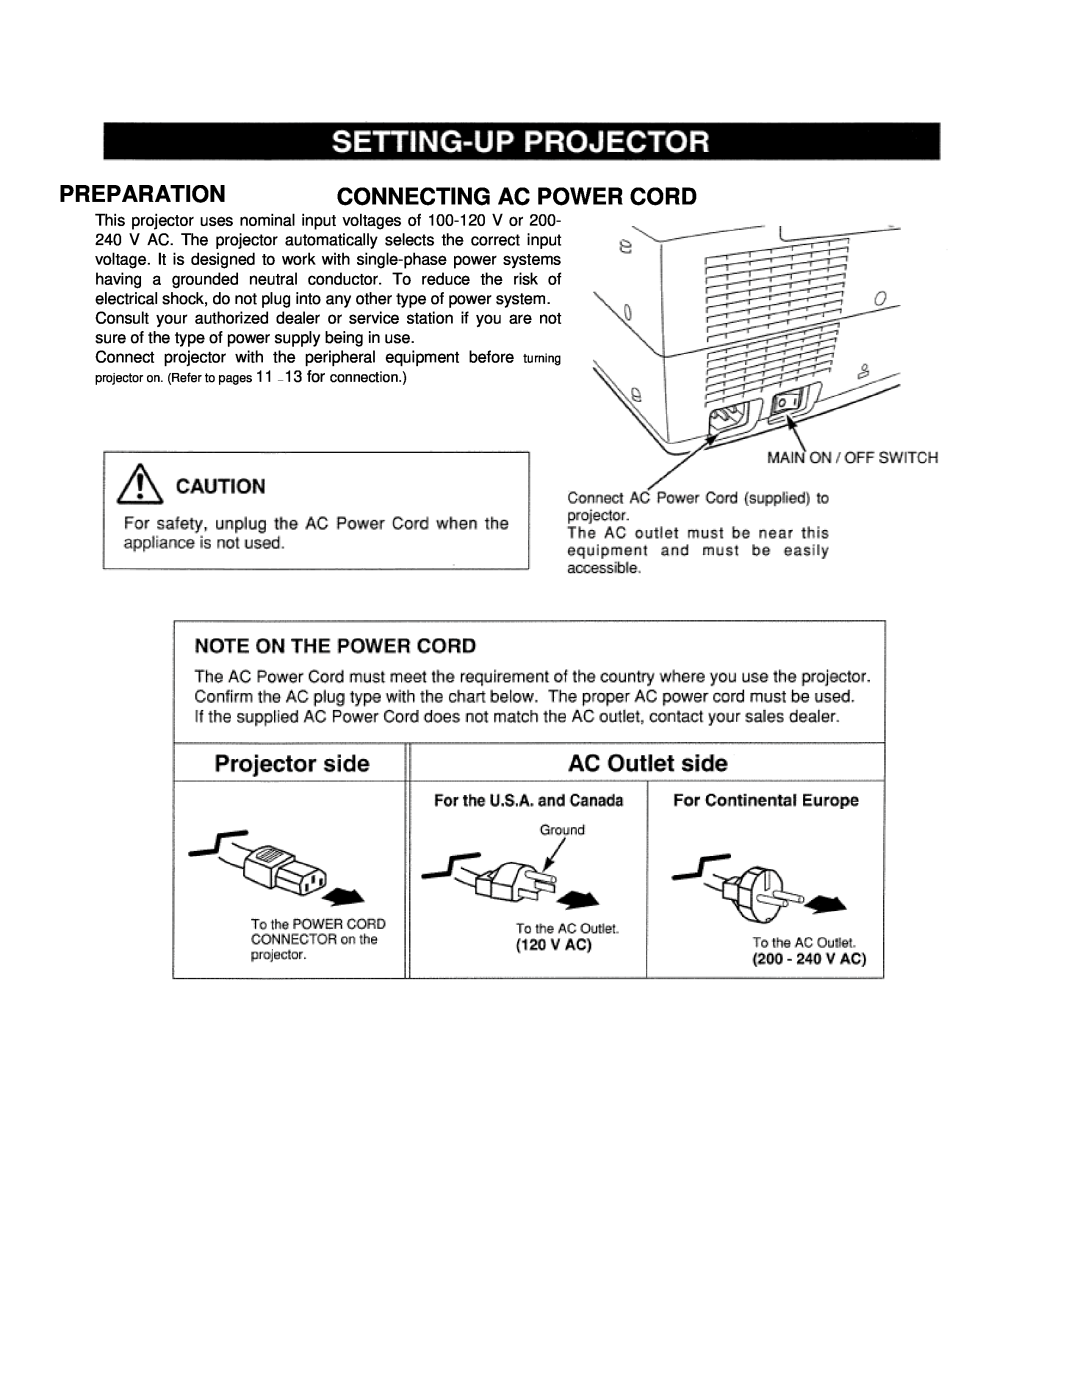 Eiki LC-VC1 owner manual Preparation, Connecting Ac Power Cord 